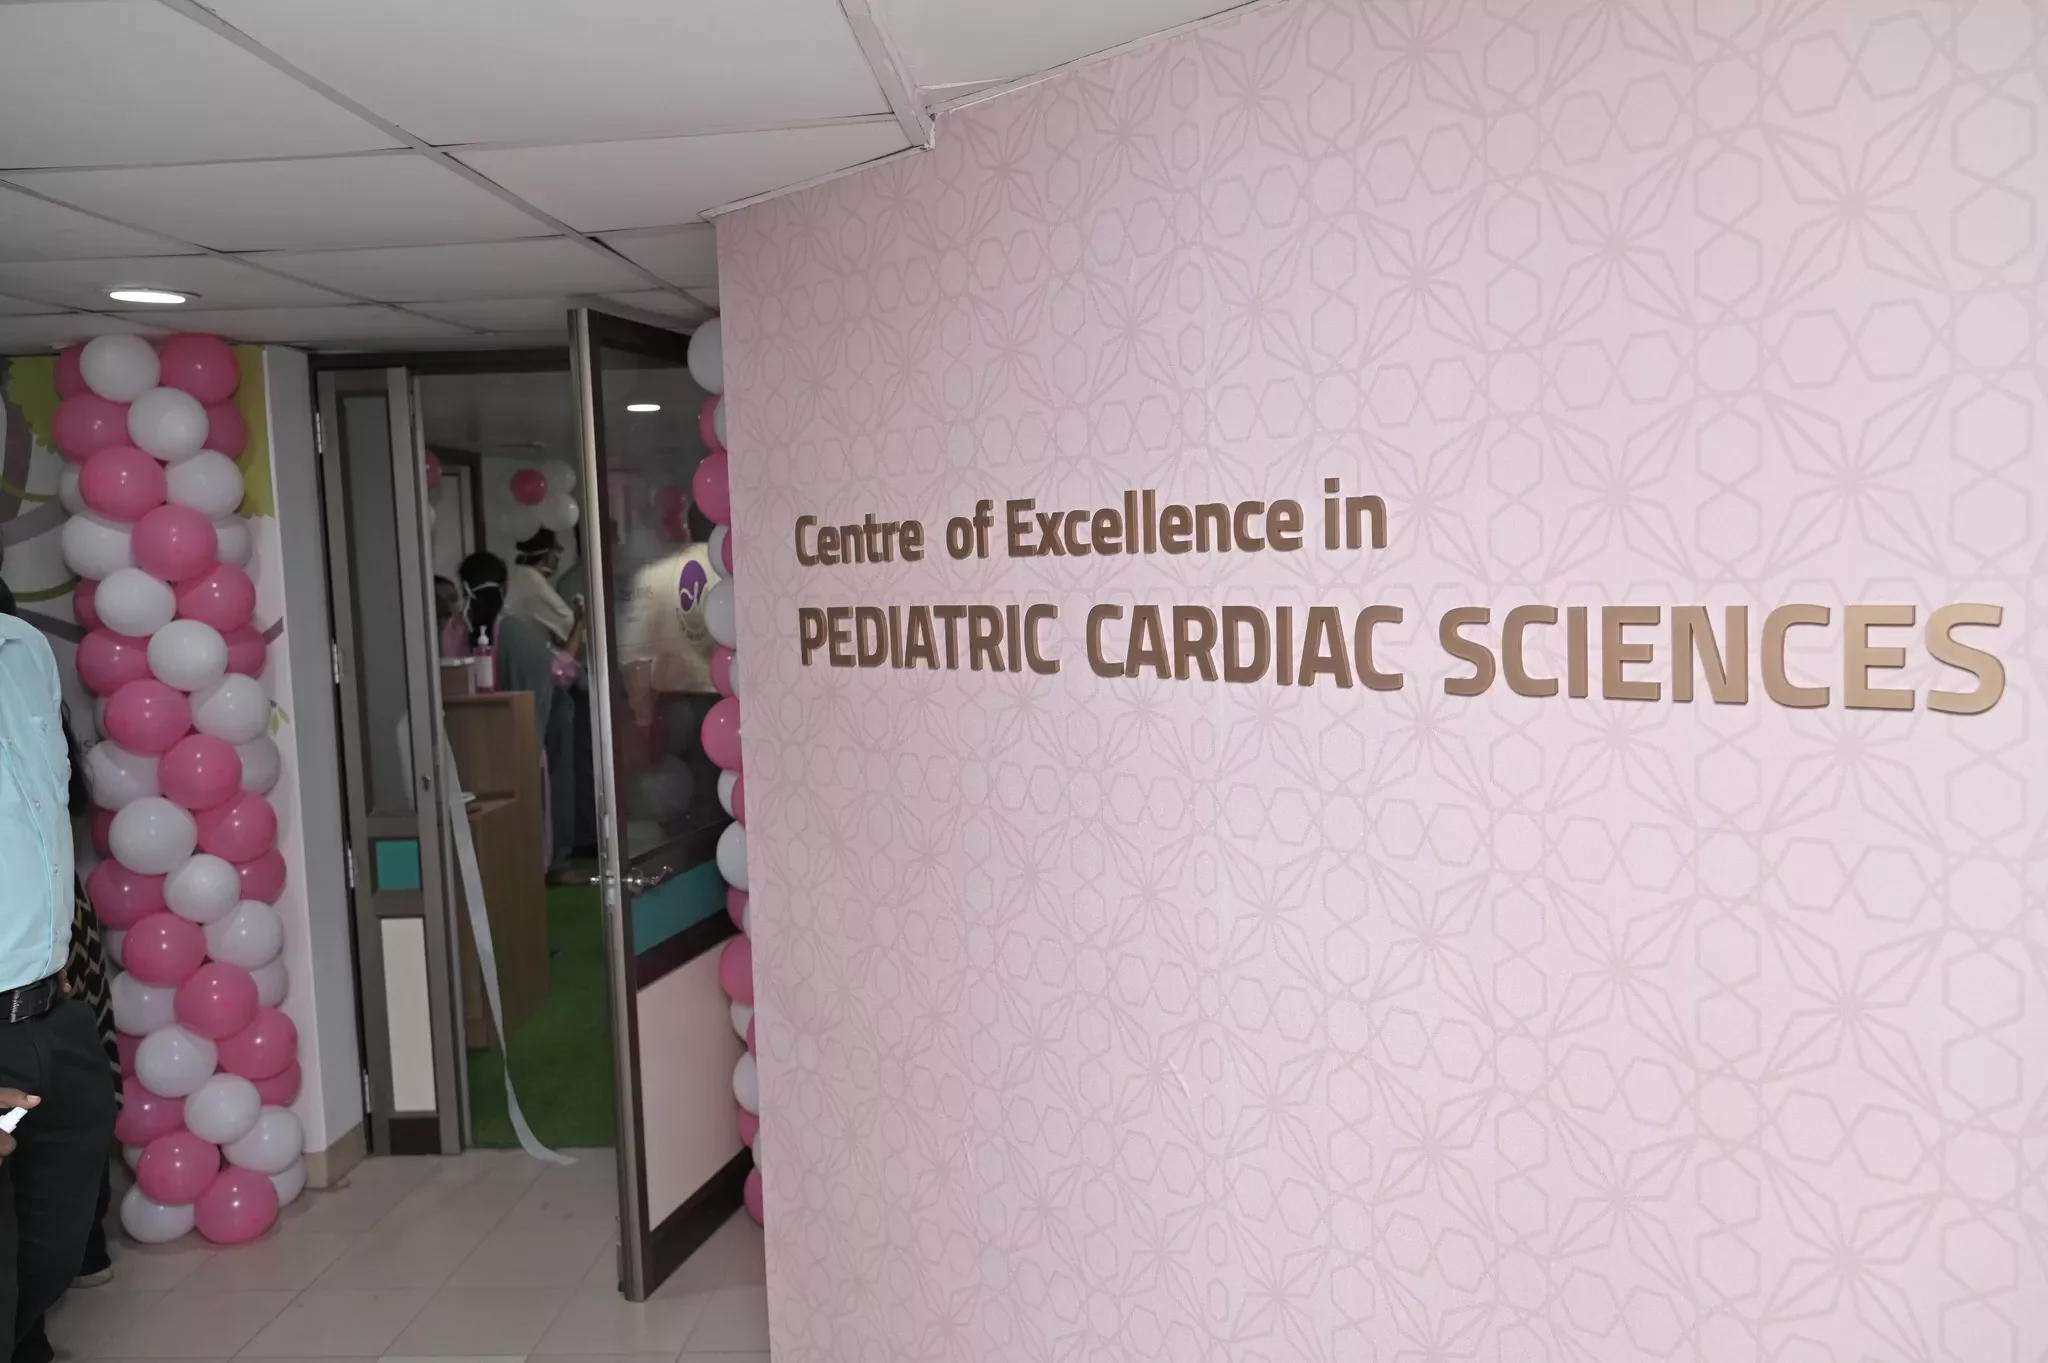 Centre of Excellence in Pediatric Cardiac Sciences